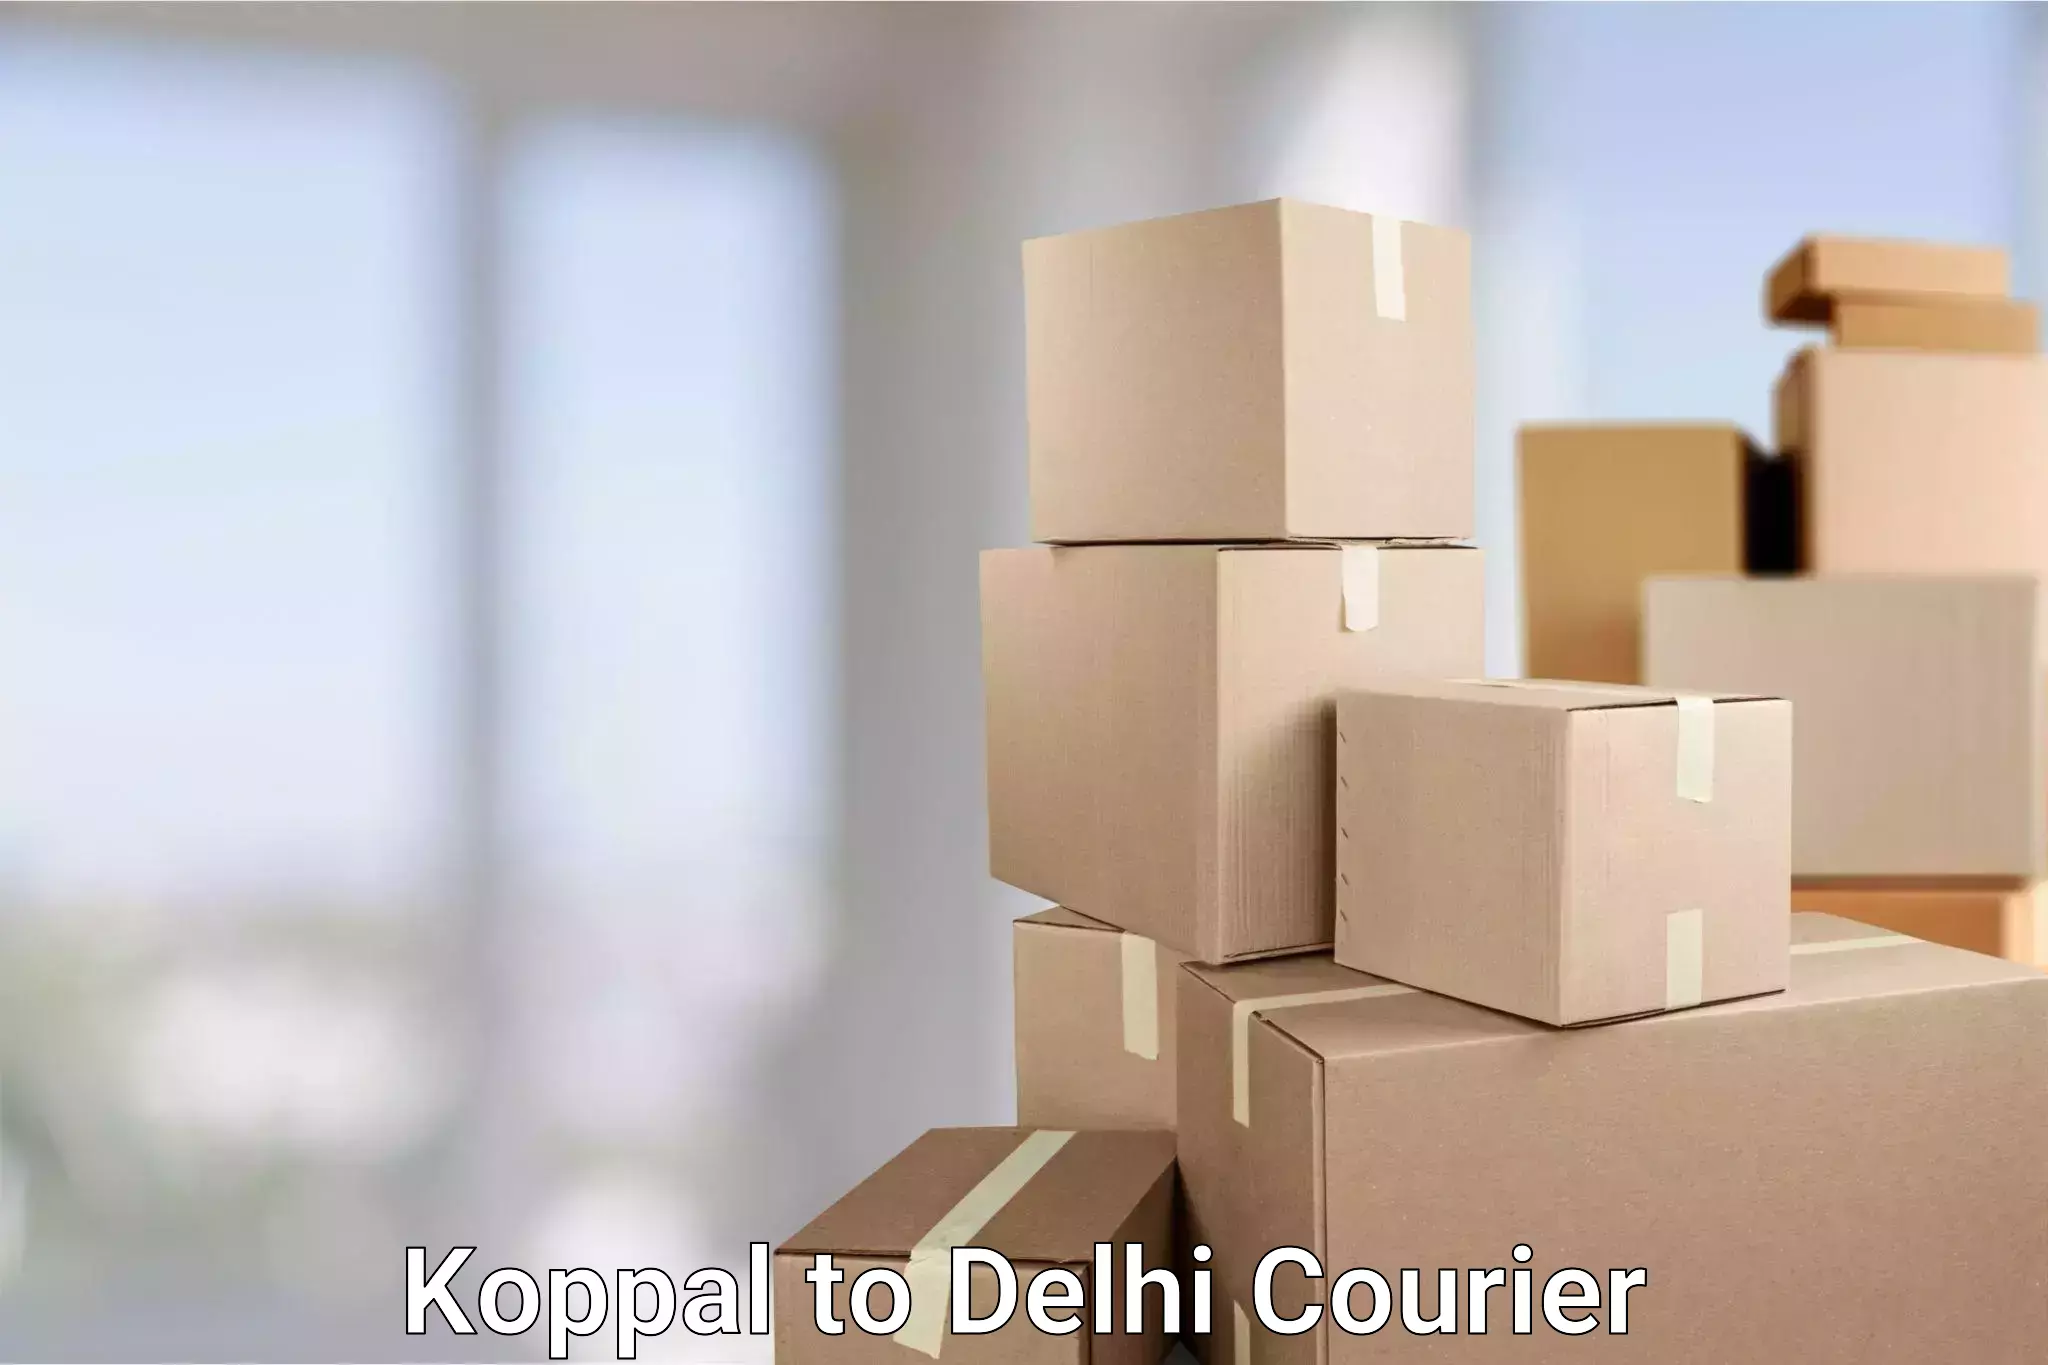 Same-day delivery solutions Koppal to Ramesh Nagar